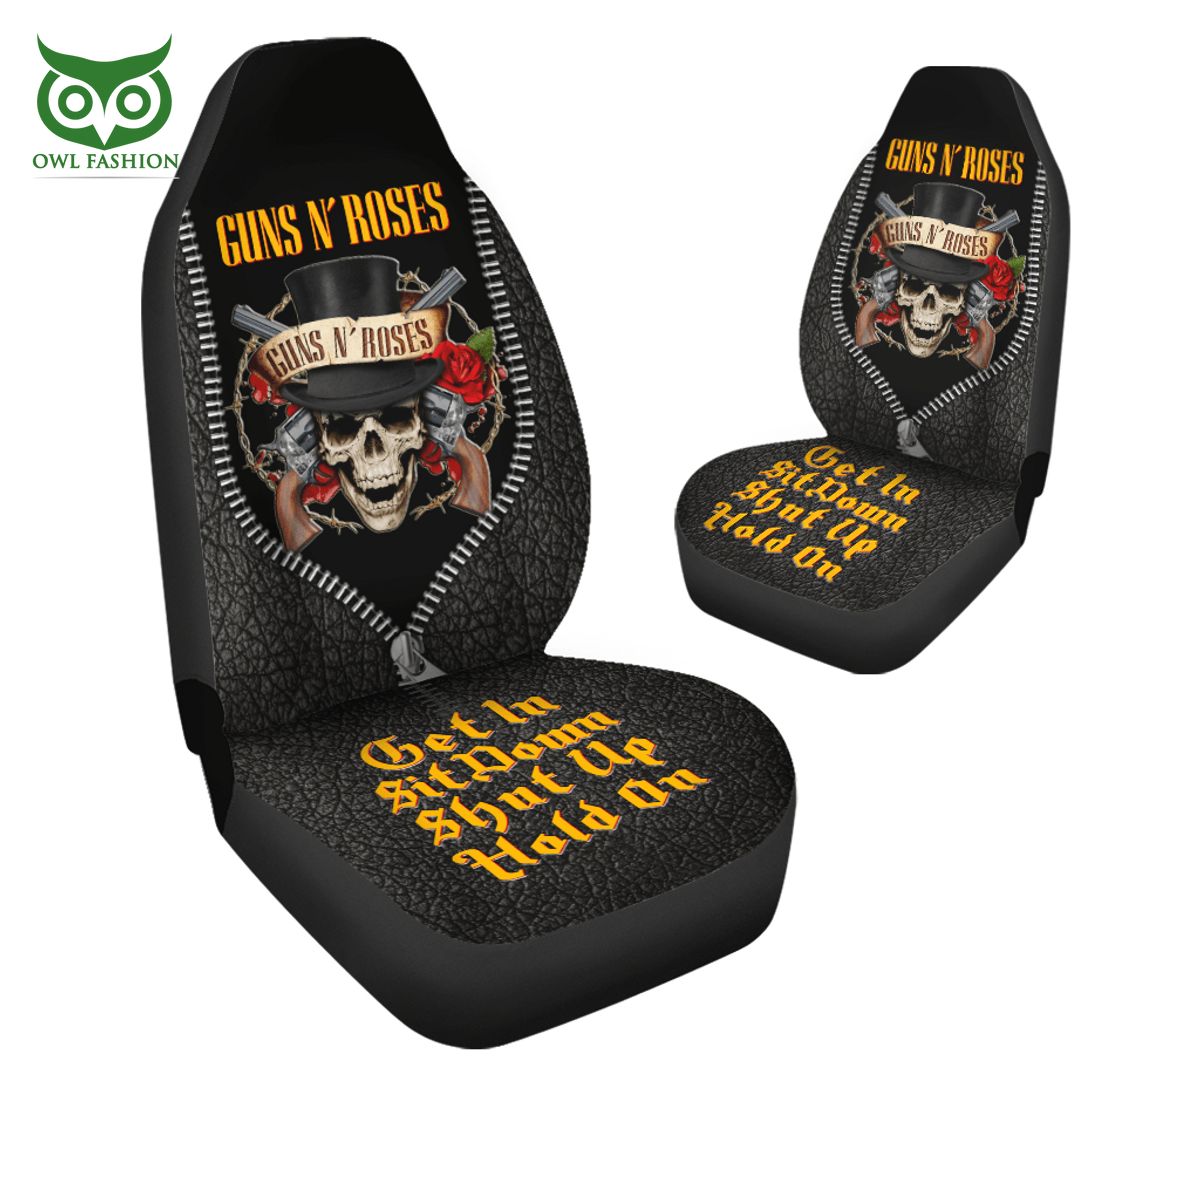 Guns N Roses Premium Leather Car Seat Cover Our hard working soul